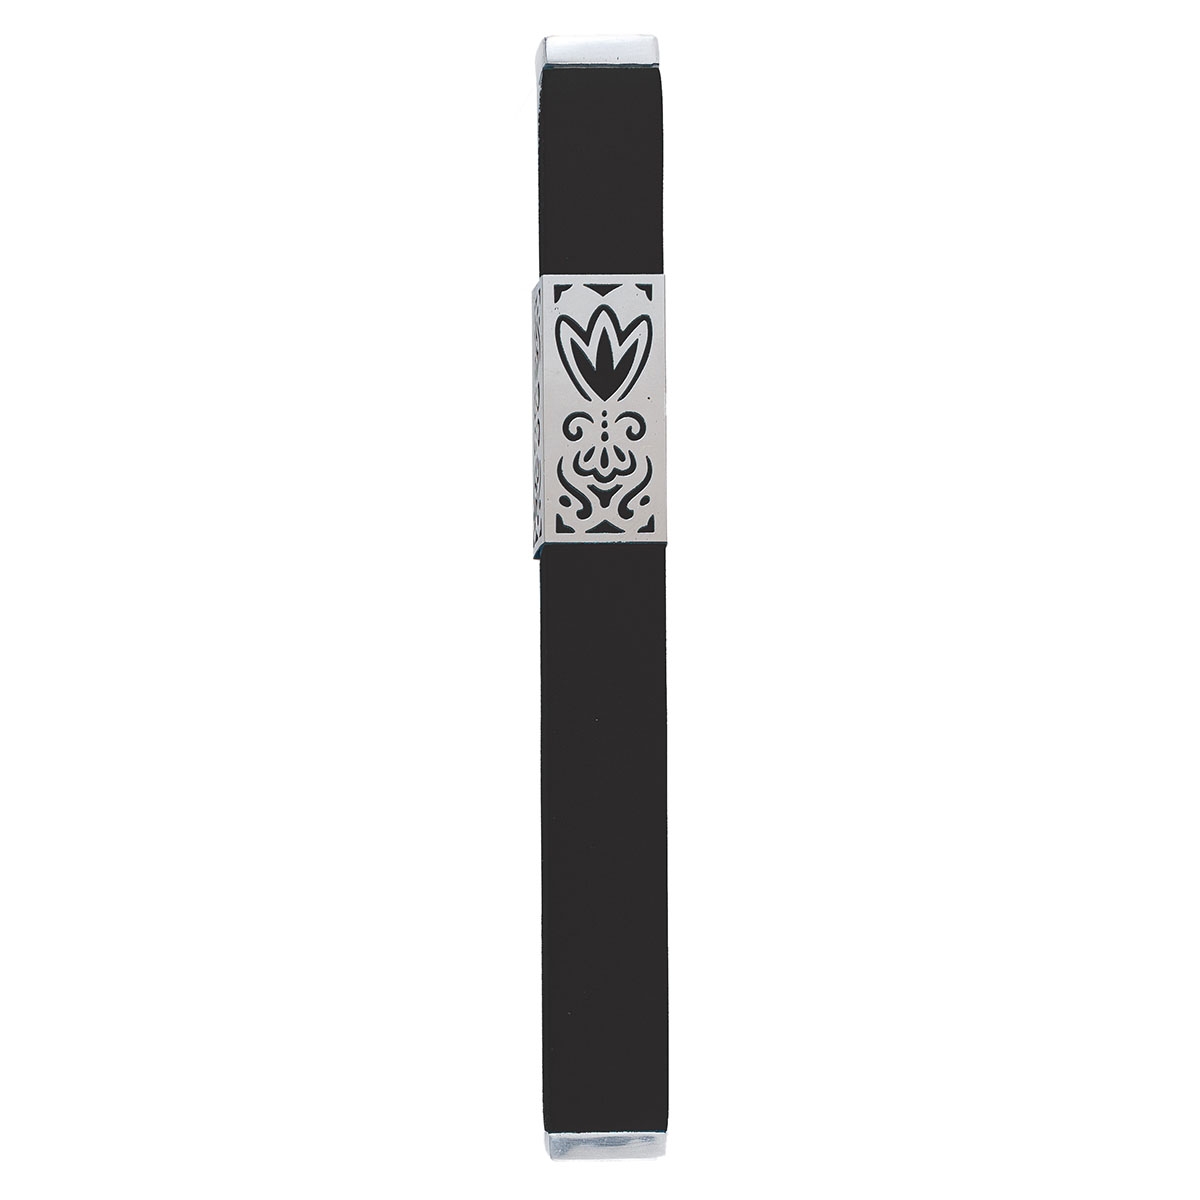 Yair Emanuel Decorated Mezuzah Case with Shin (Choice of Colors) - 1